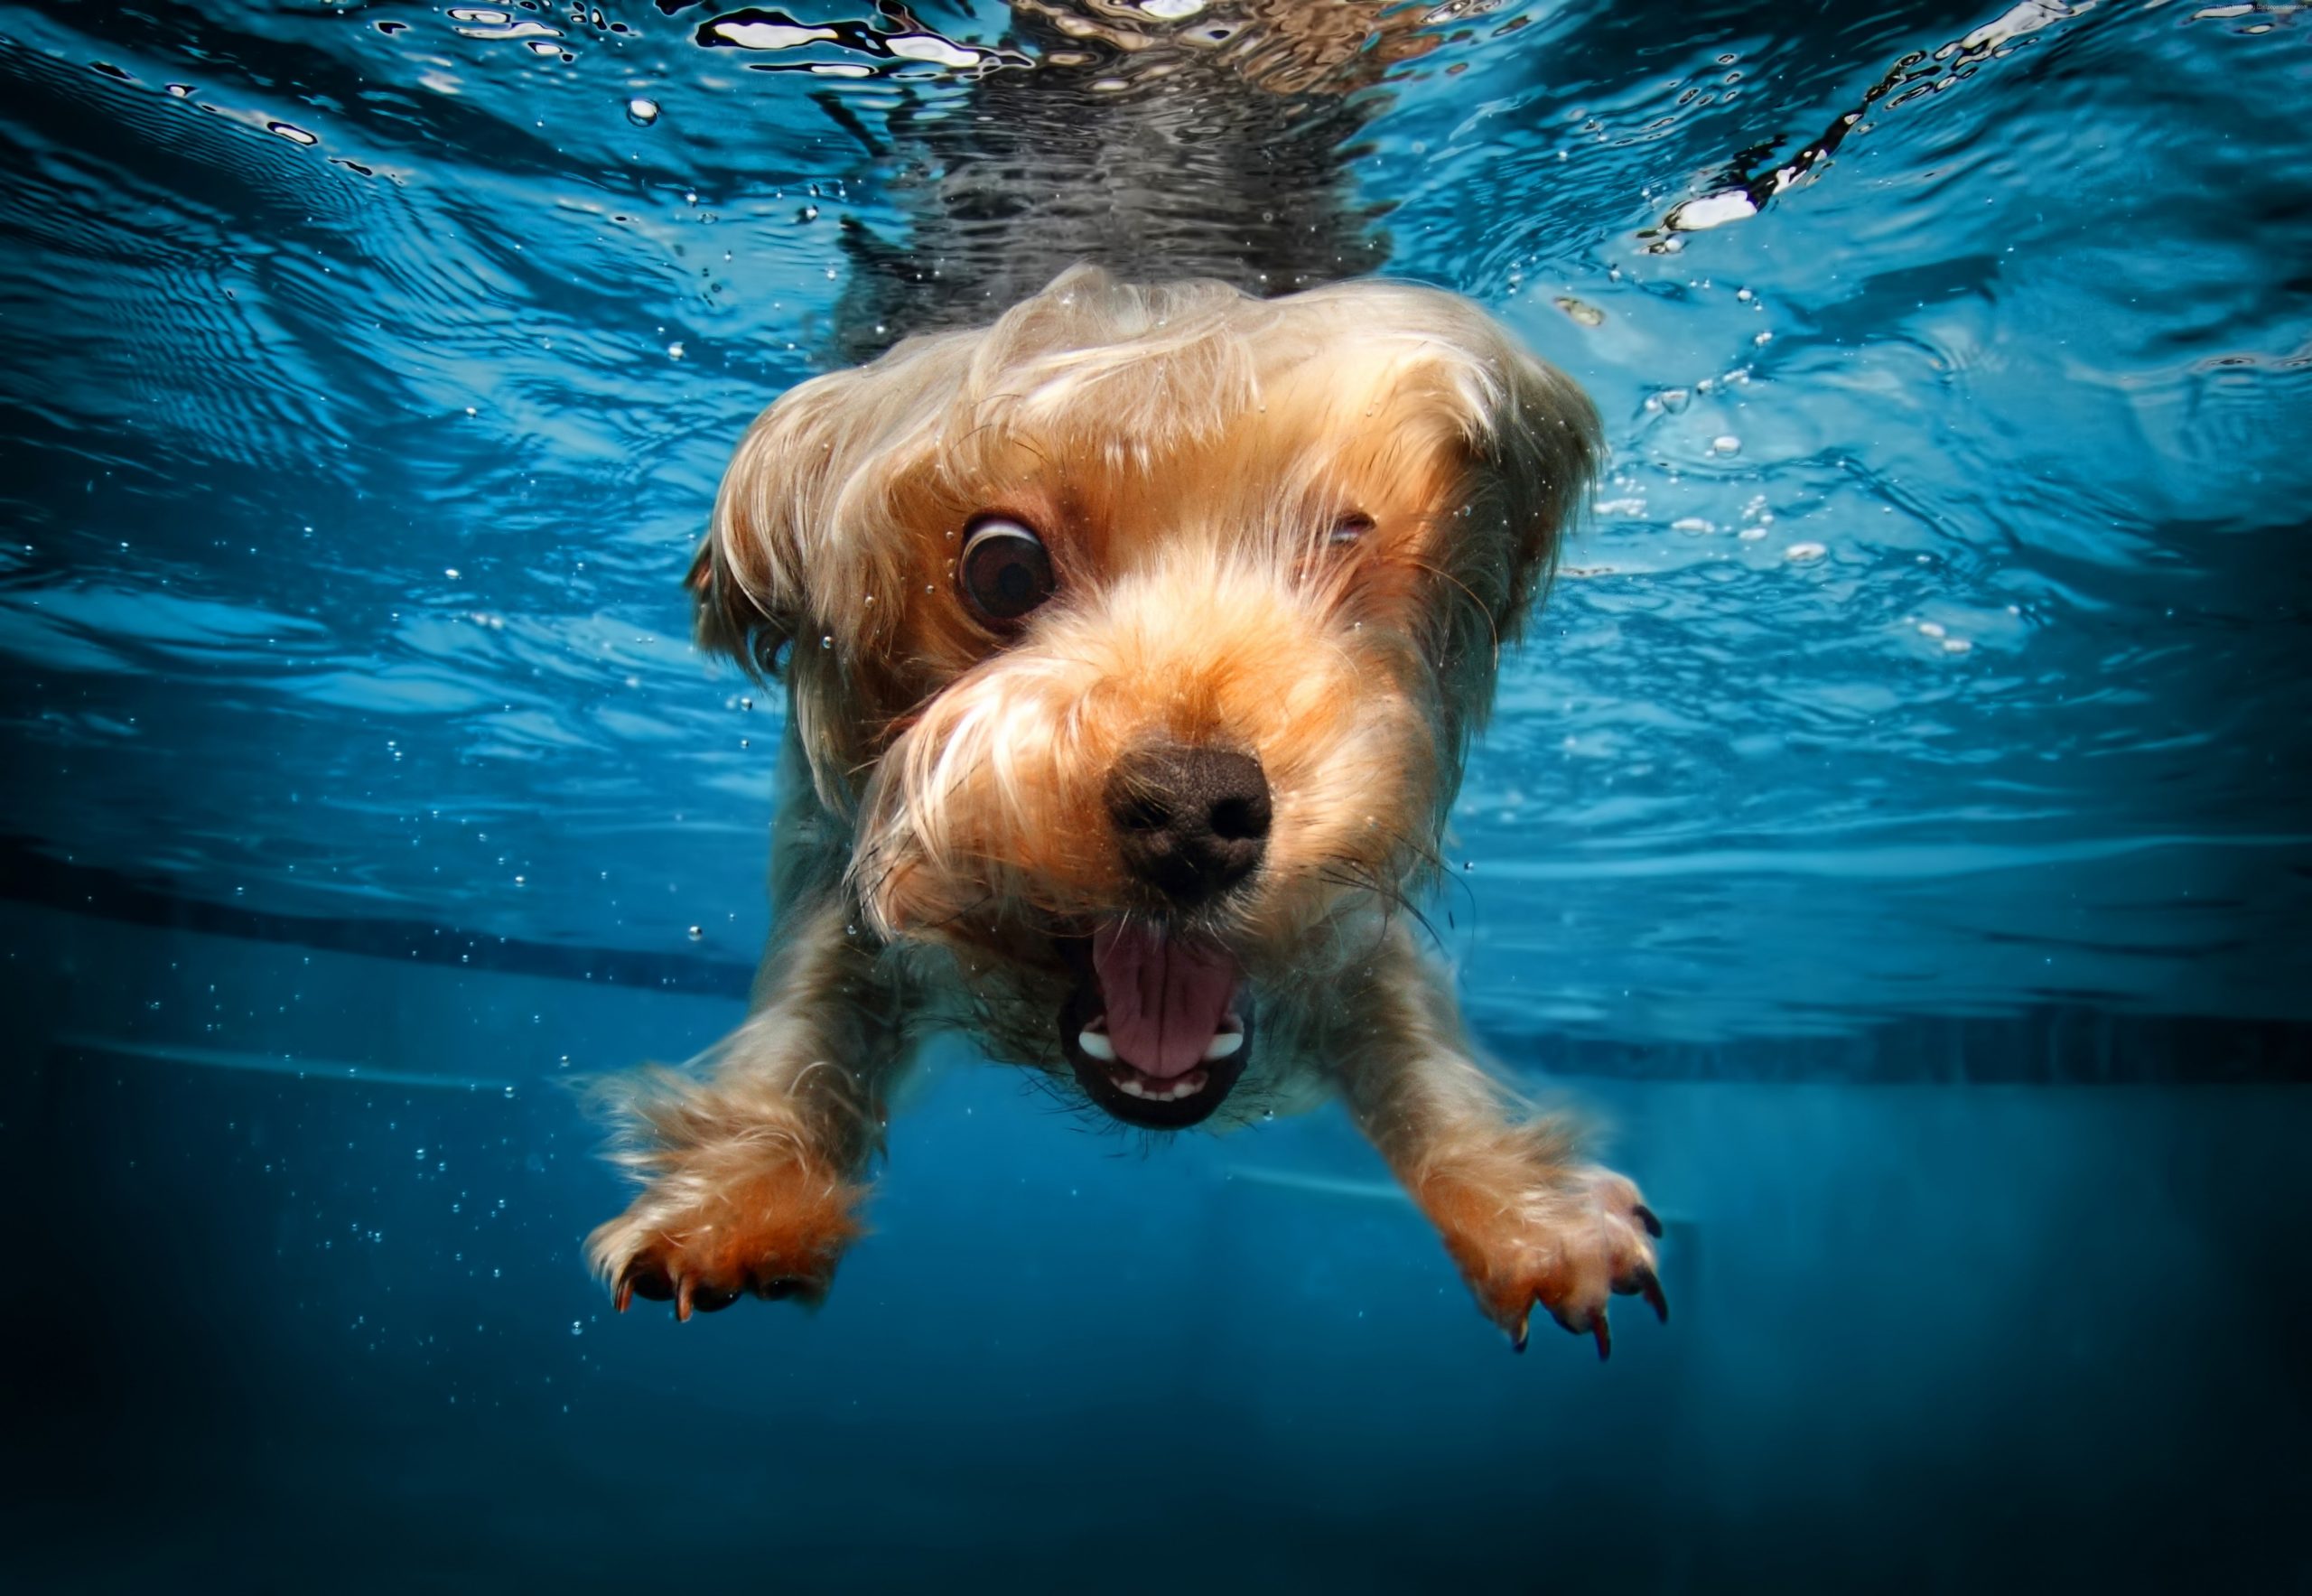 Cute animals, terrier, funny, dog, underwater, canine, one animal wallpaper